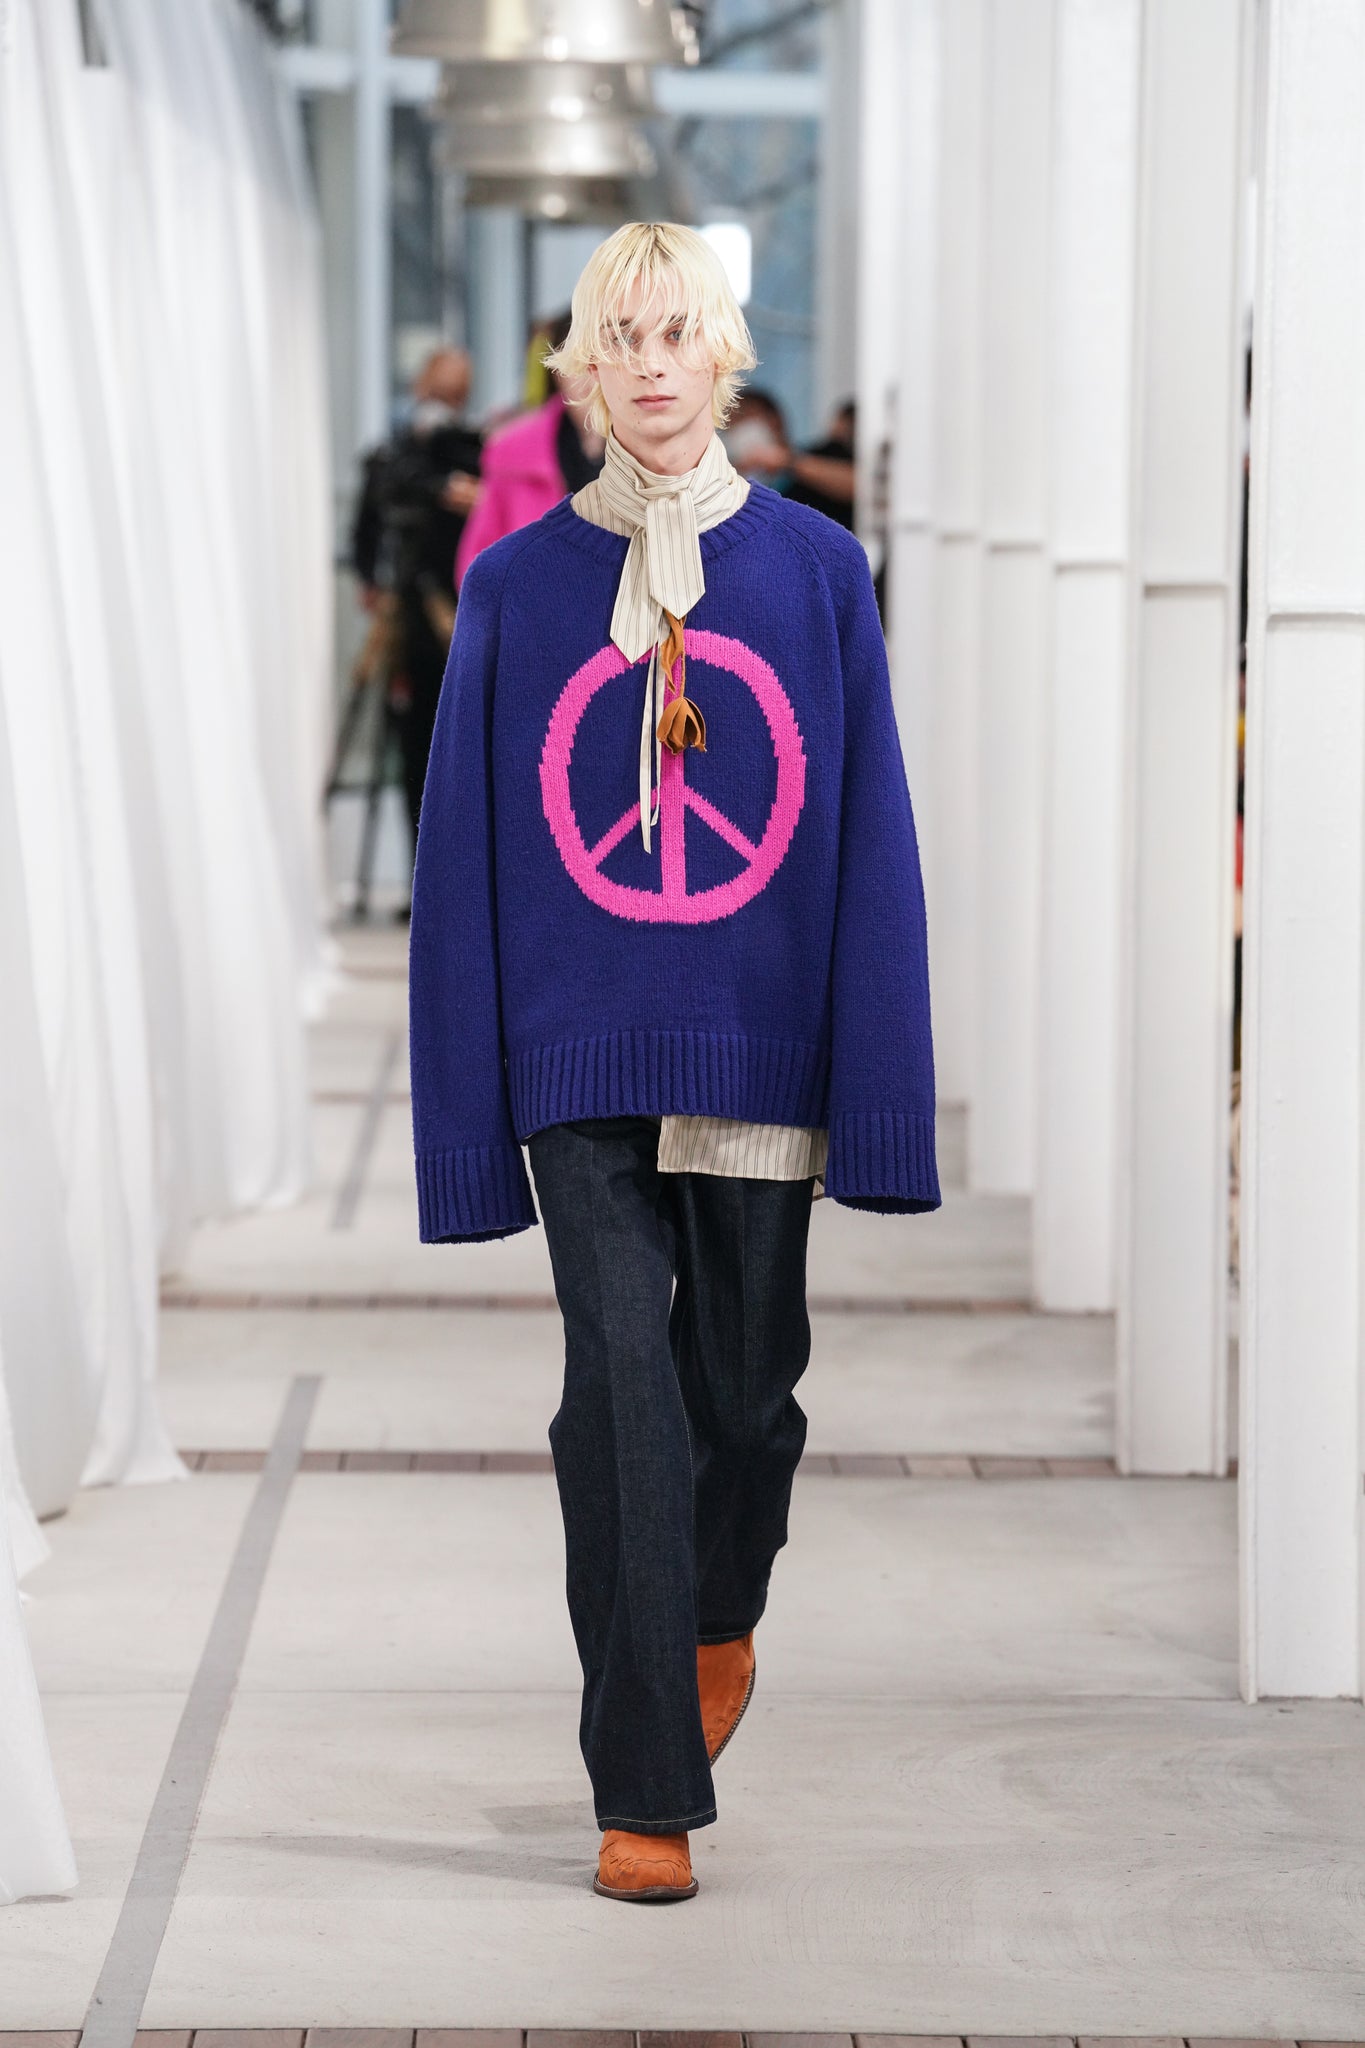 BED j.w. FORDの22awのpeace mark knitのlook